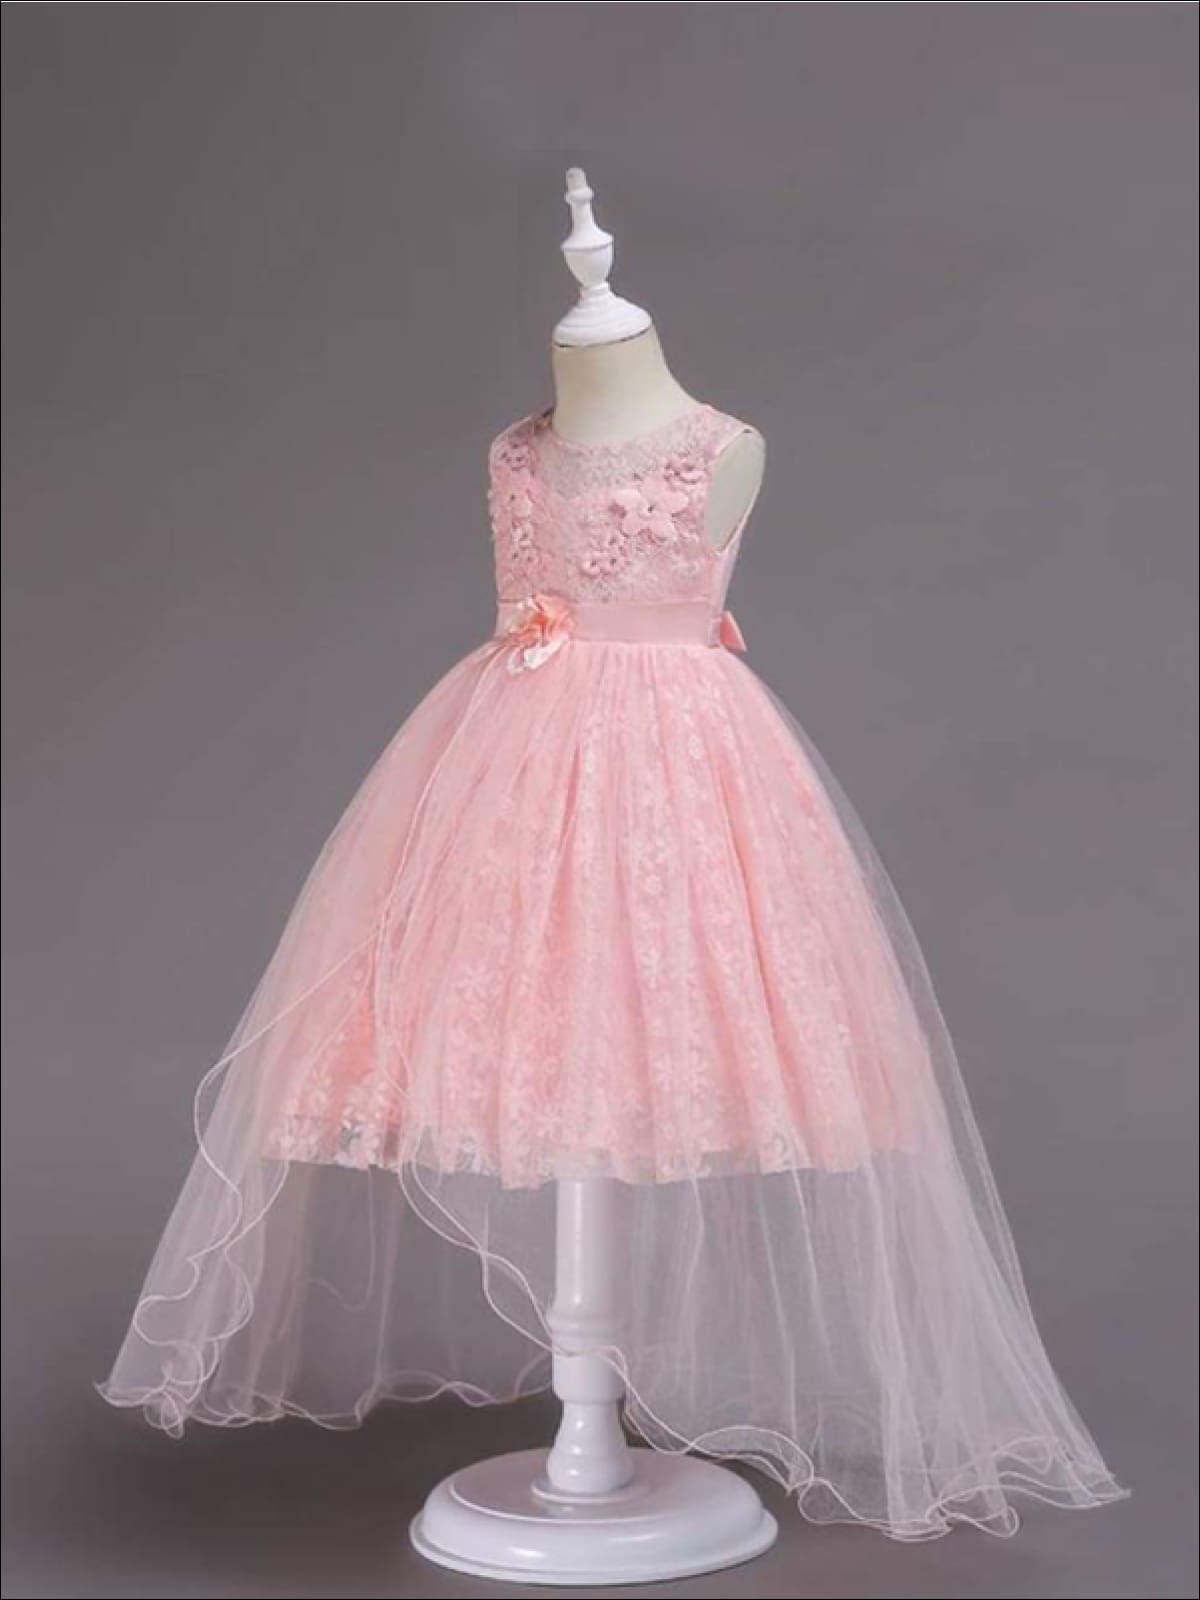 Girls Exquisite Tulle & Lace Floral Applique Holiday Dress - Girls Fall Dressy Dress